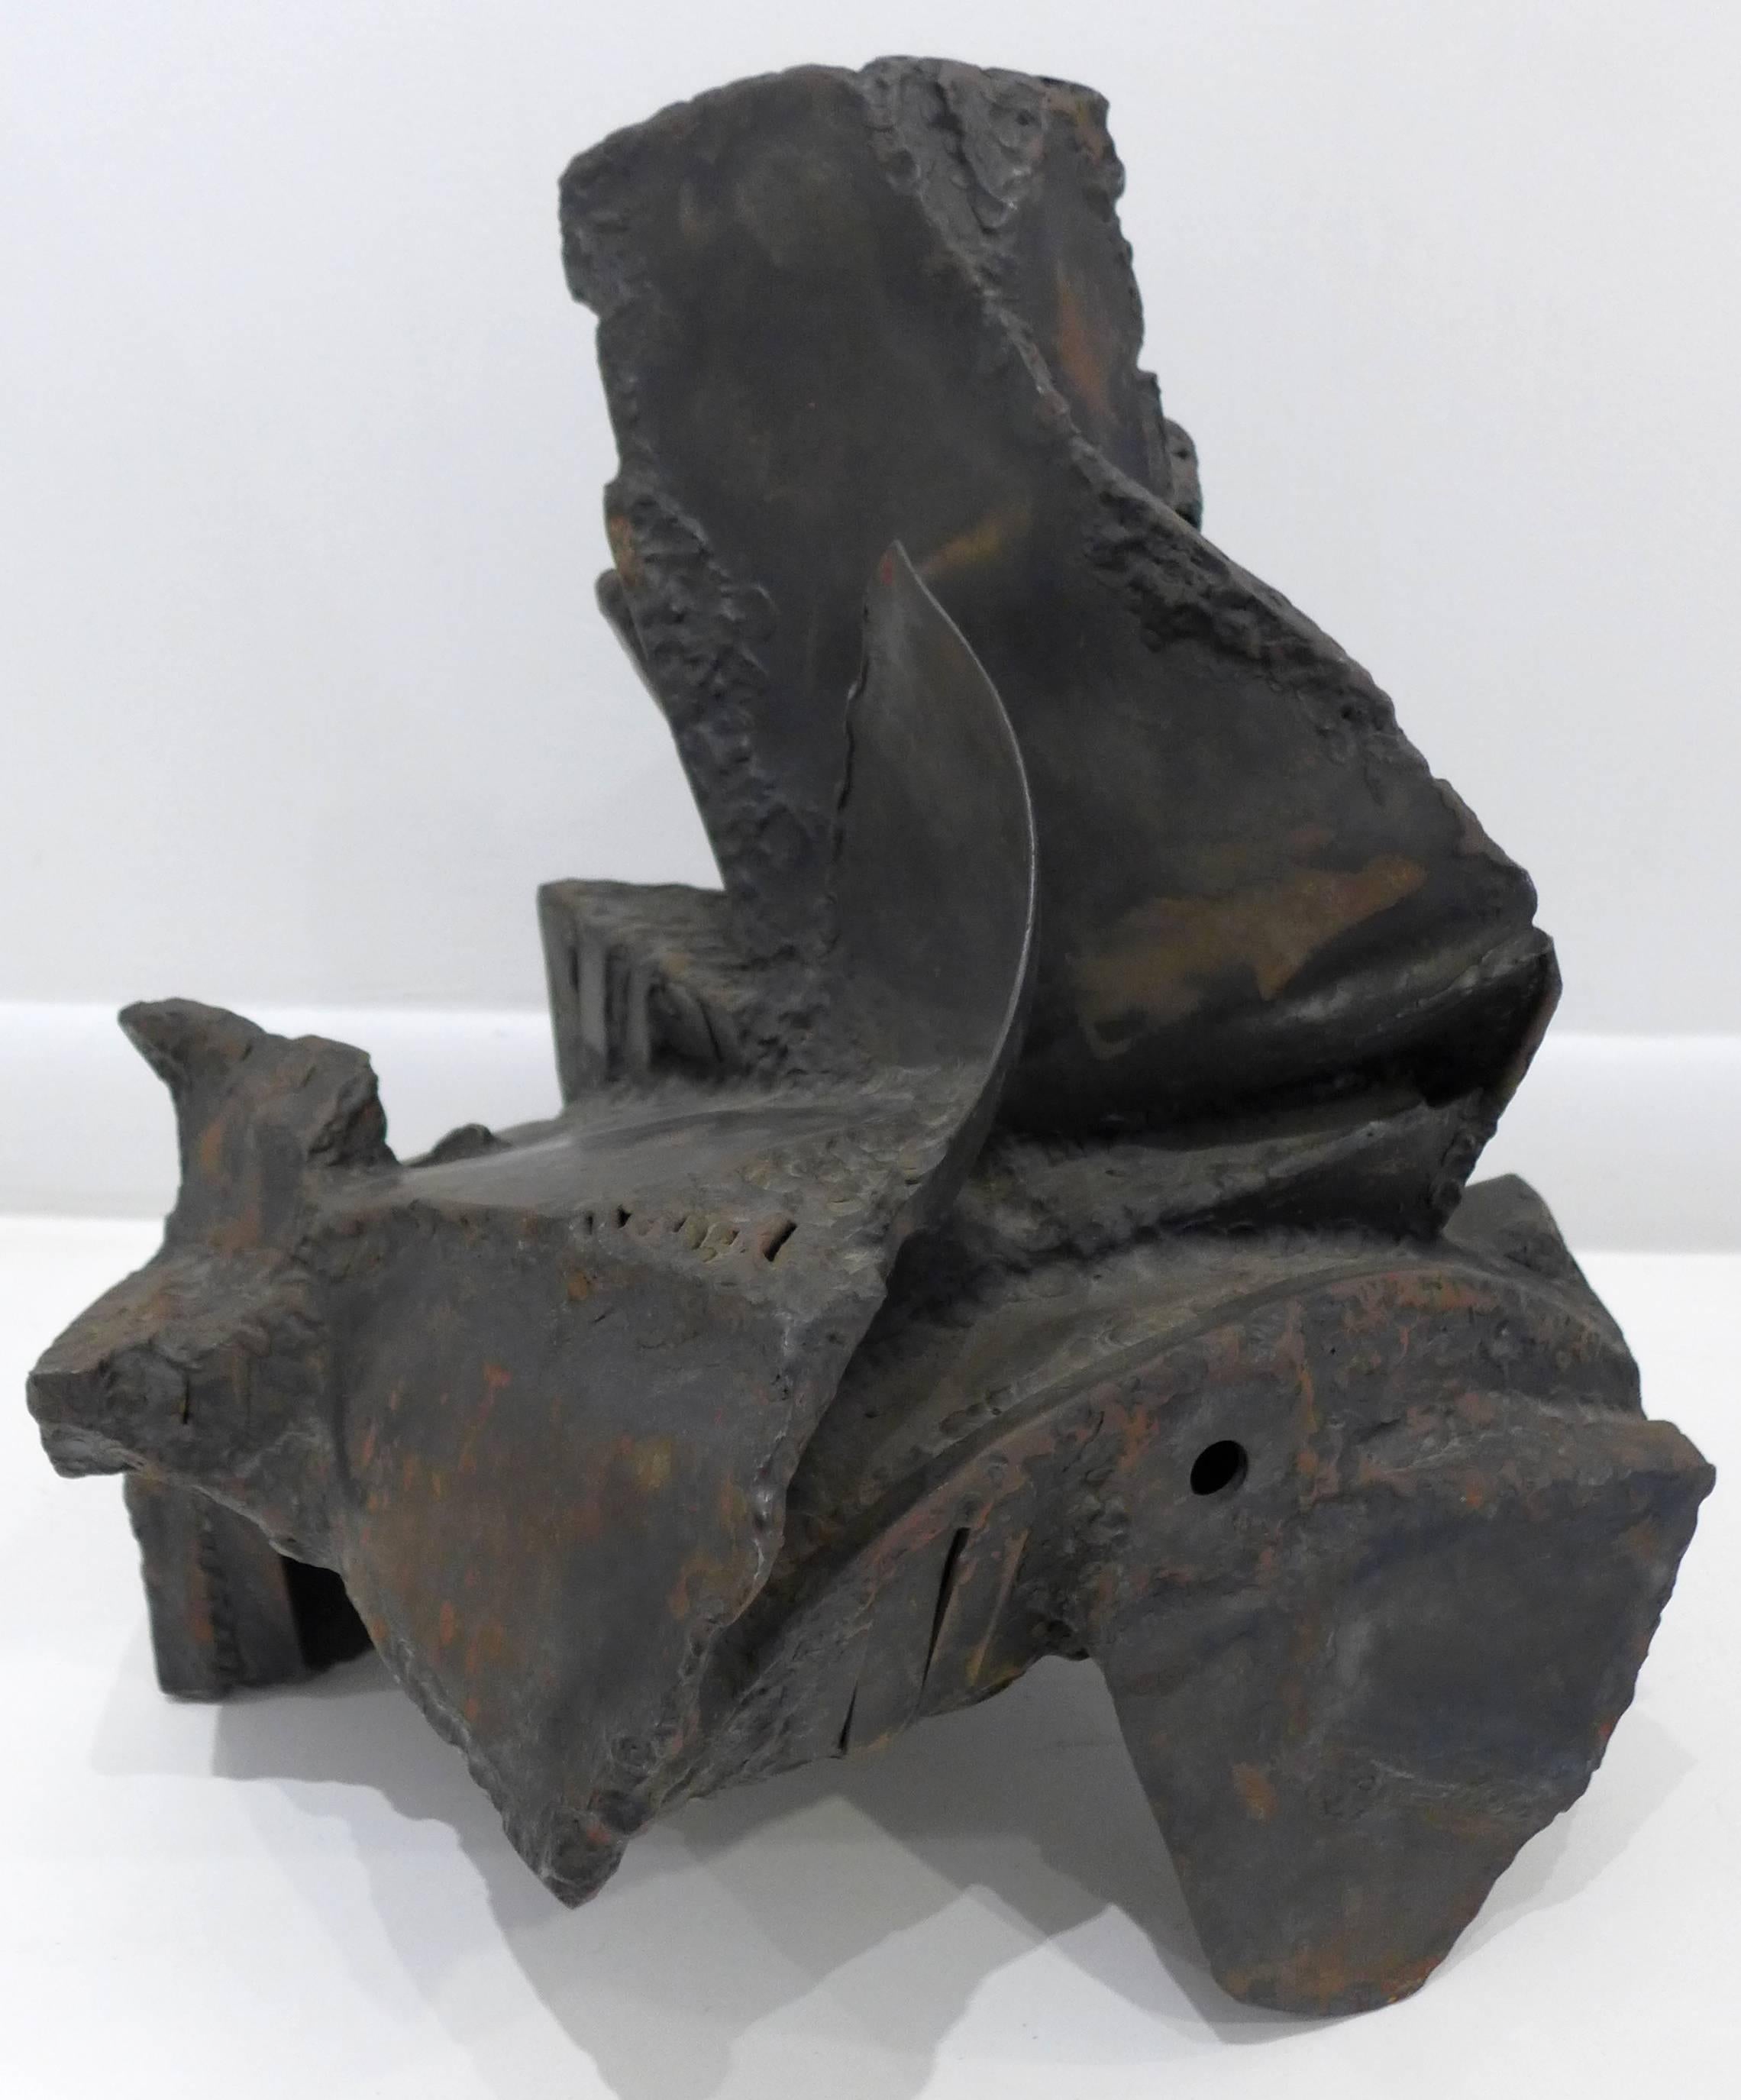 Abstract Brutalist sculpture of found and re-purposed iron Industrial parts, by Harry Bouras (1931-1990). Signed and dated 1966. Bouras was an artist, critic, teacher and radio personality in Chicago. He was artist-in-residence at the University of